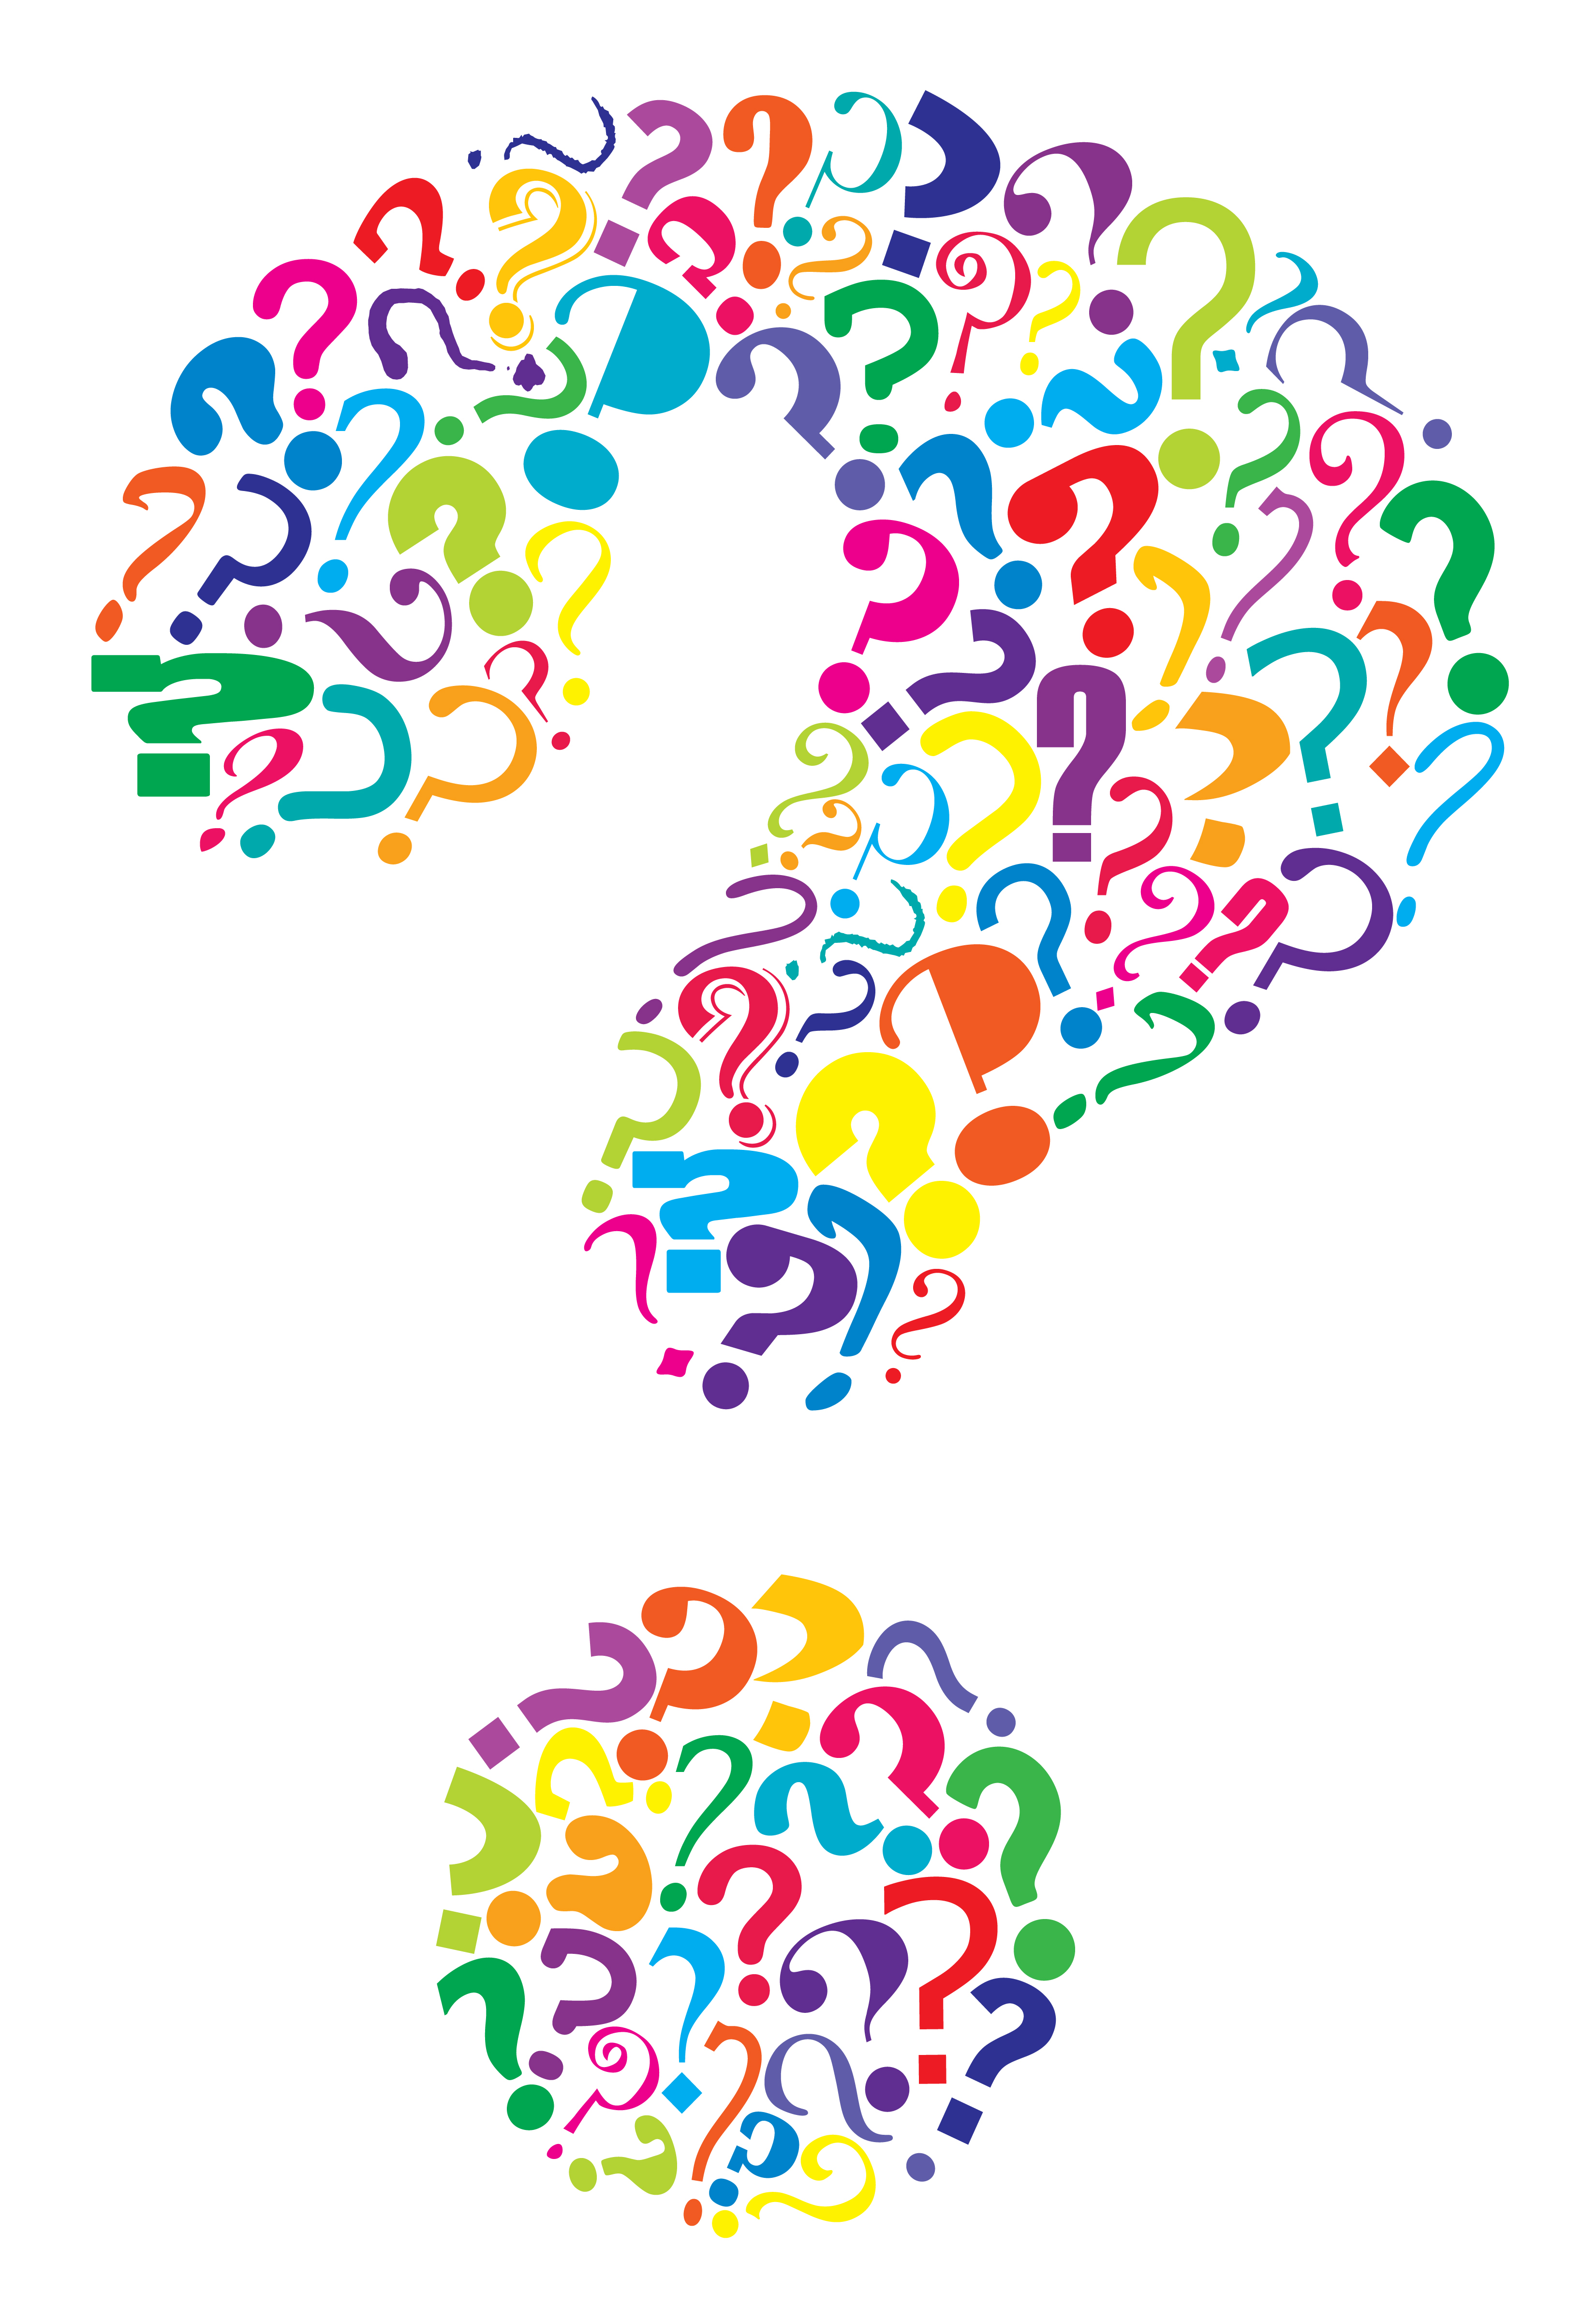 of questions marks clipart. 5